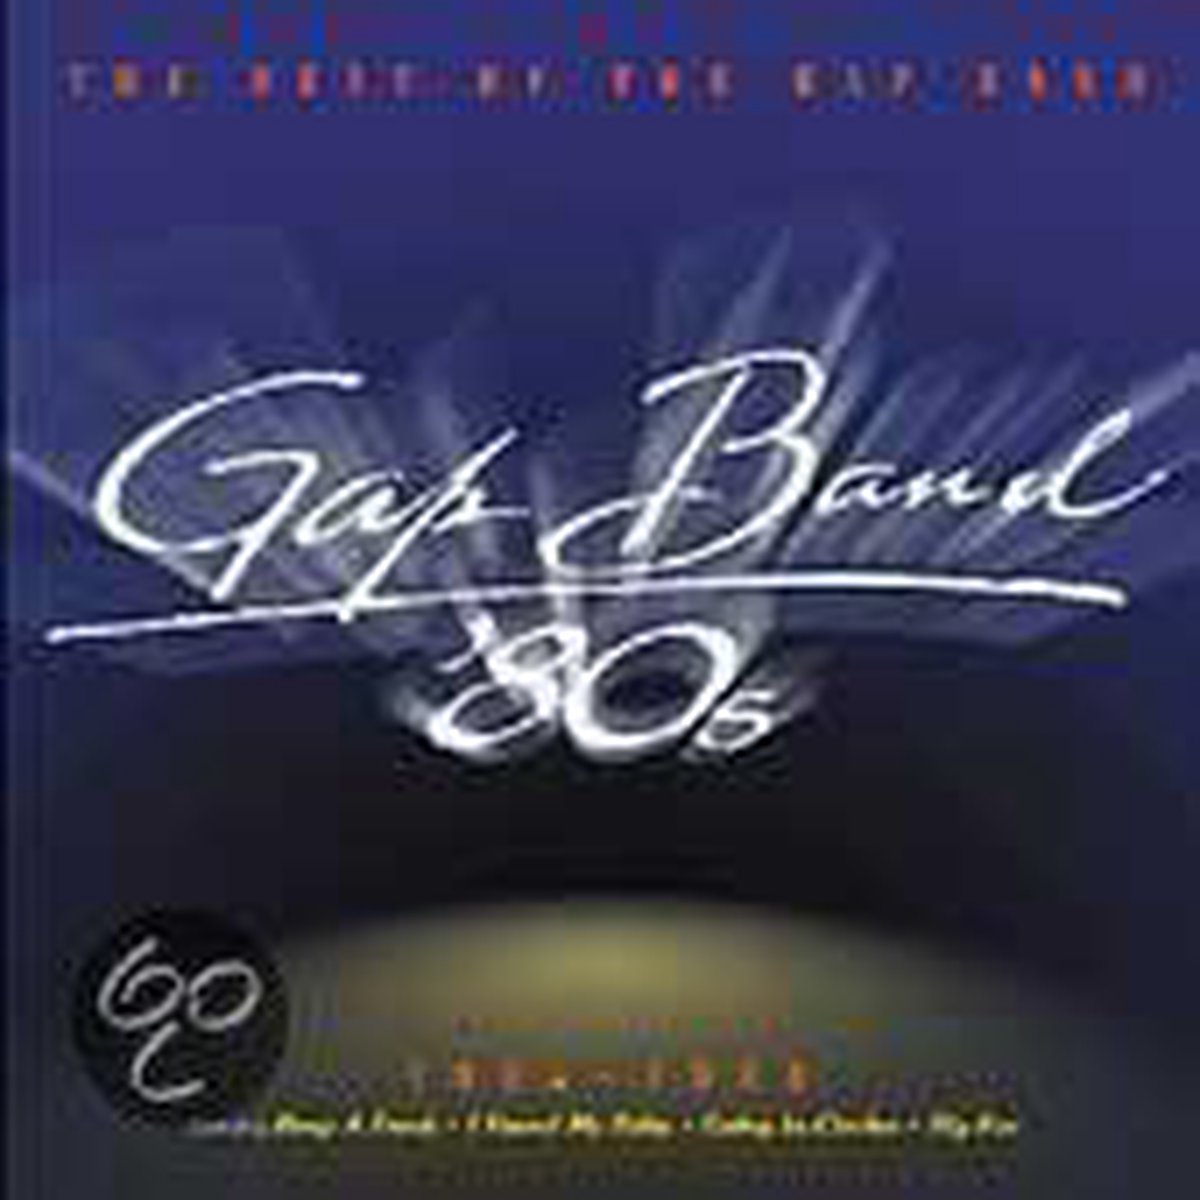 Best of the Gap Band '84-'88 - The Gap Band